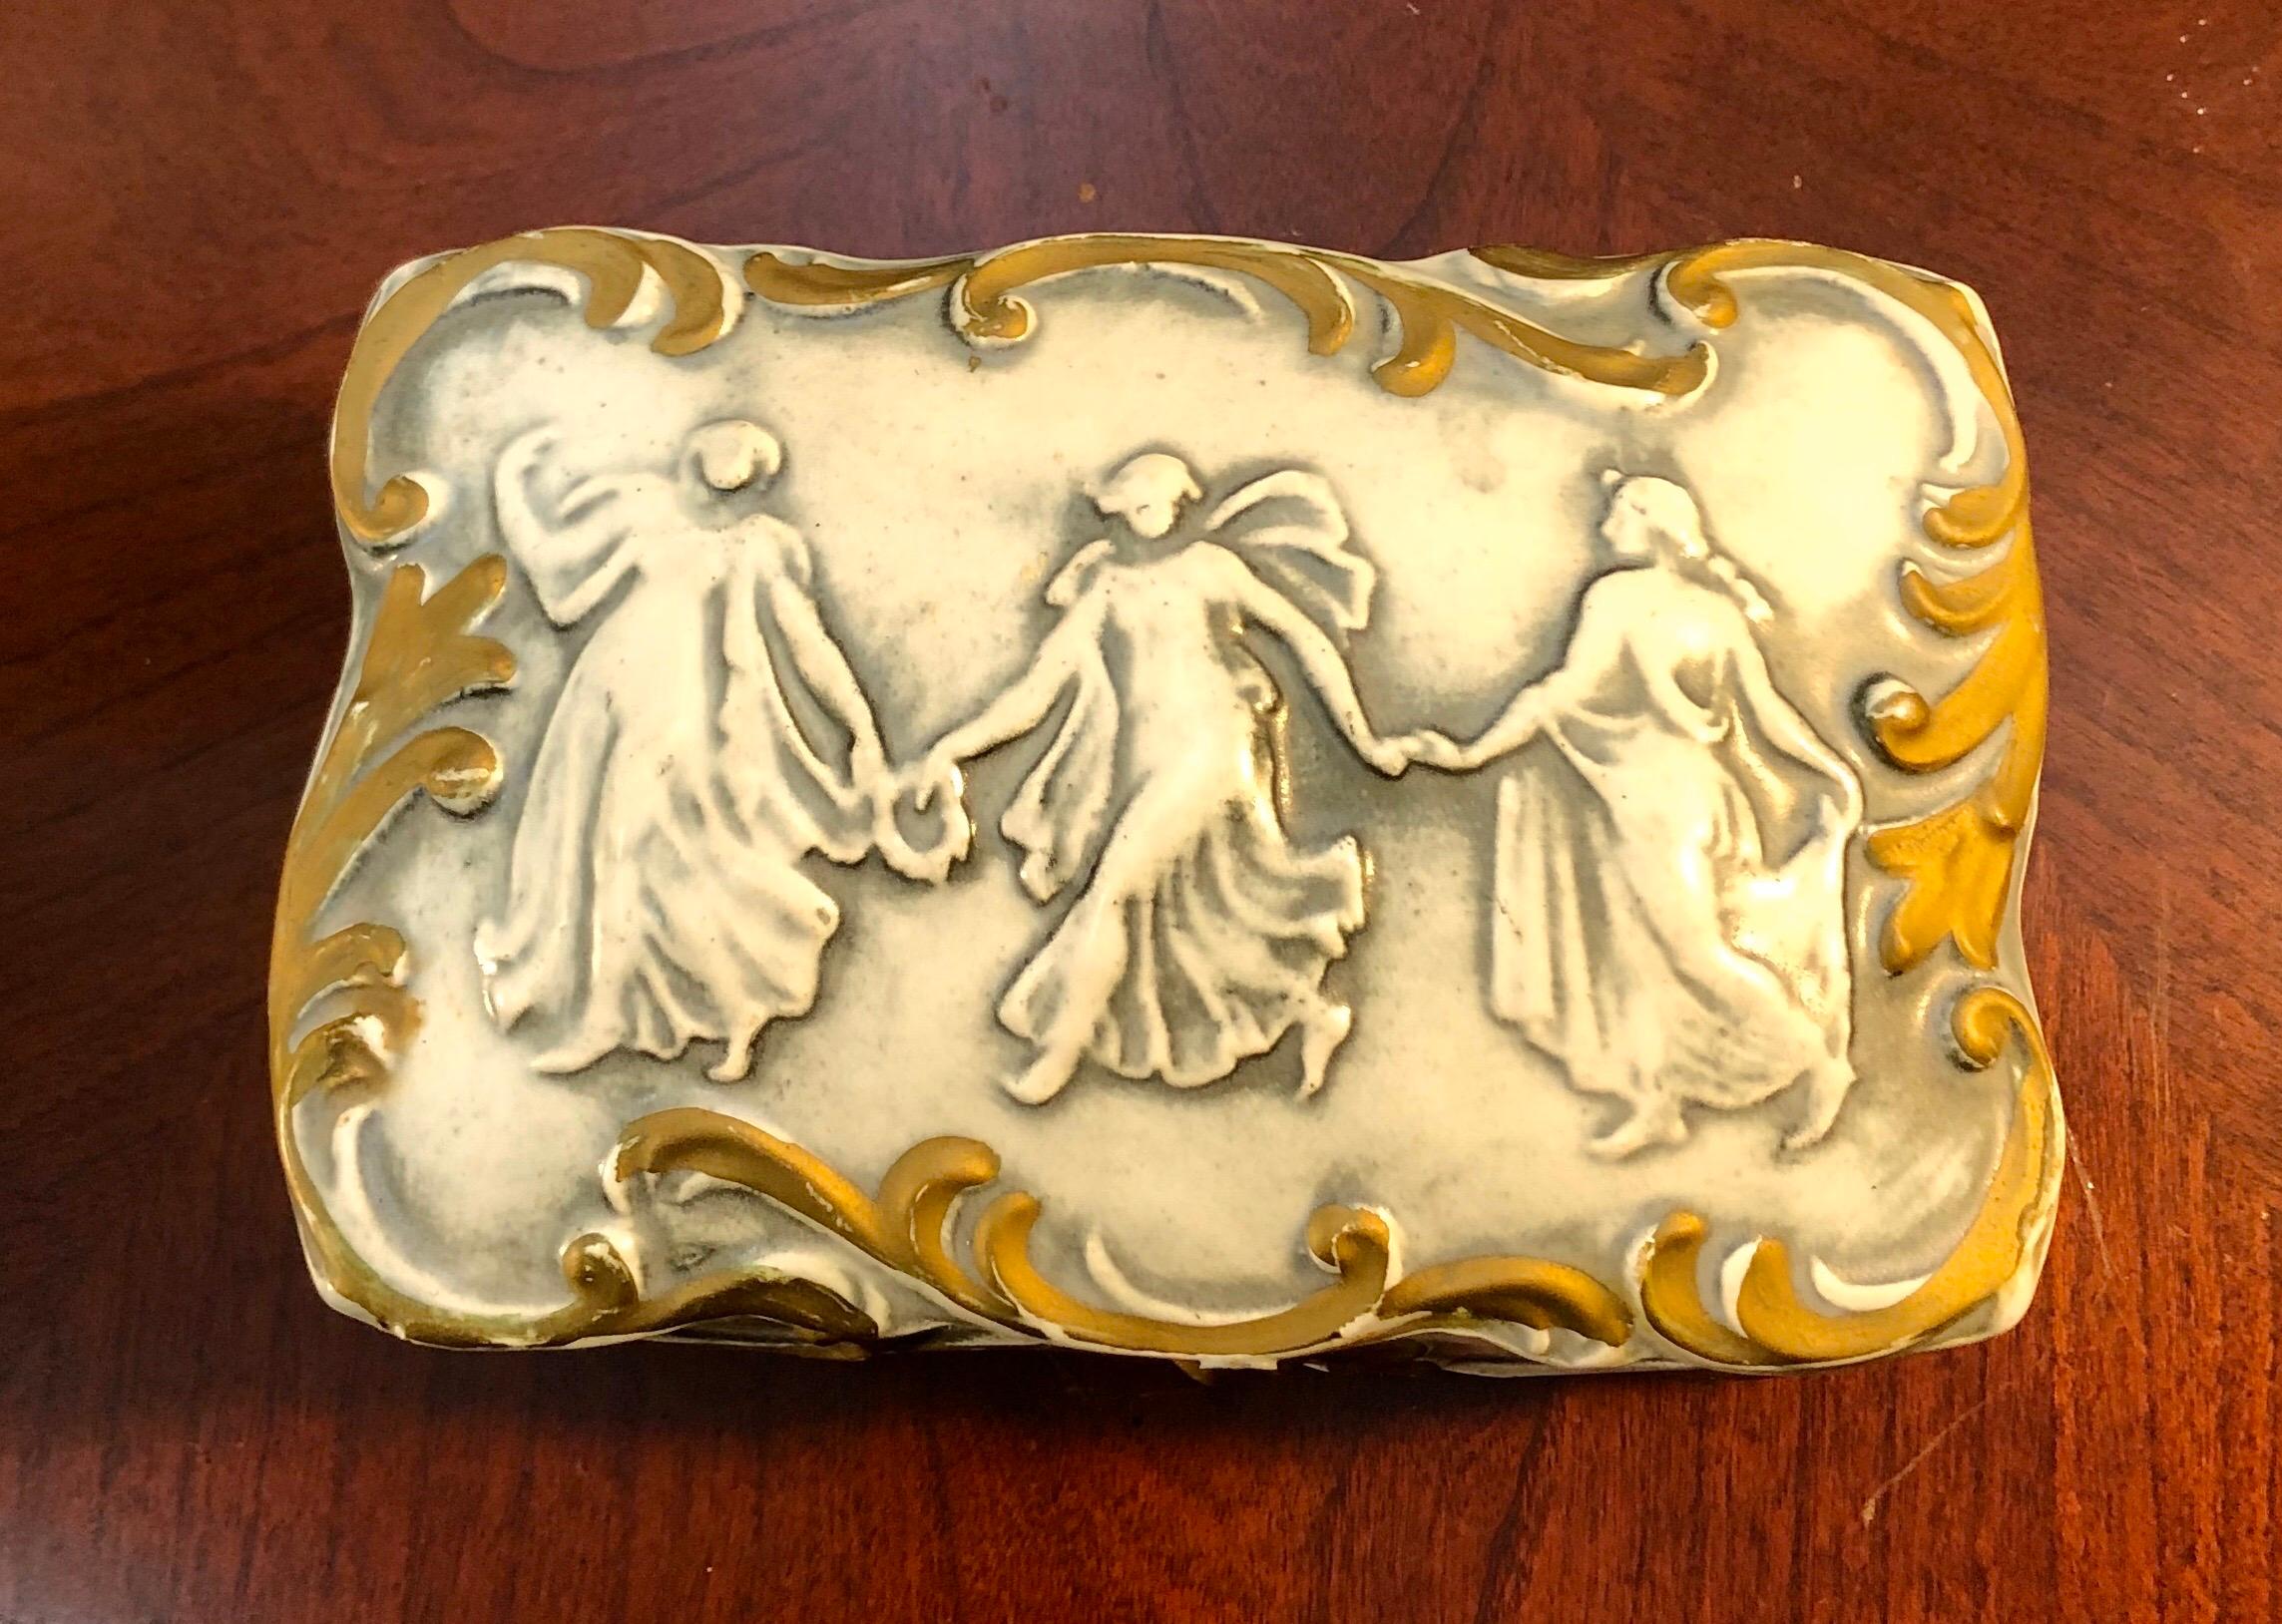 This antique French biscuit porcelain trinket box hails from the late 1800s and is in excellent condition. On the detached lid are the three graces, ethereal and lovely. The box open to reveal two trays, perfect to use for rings or other small